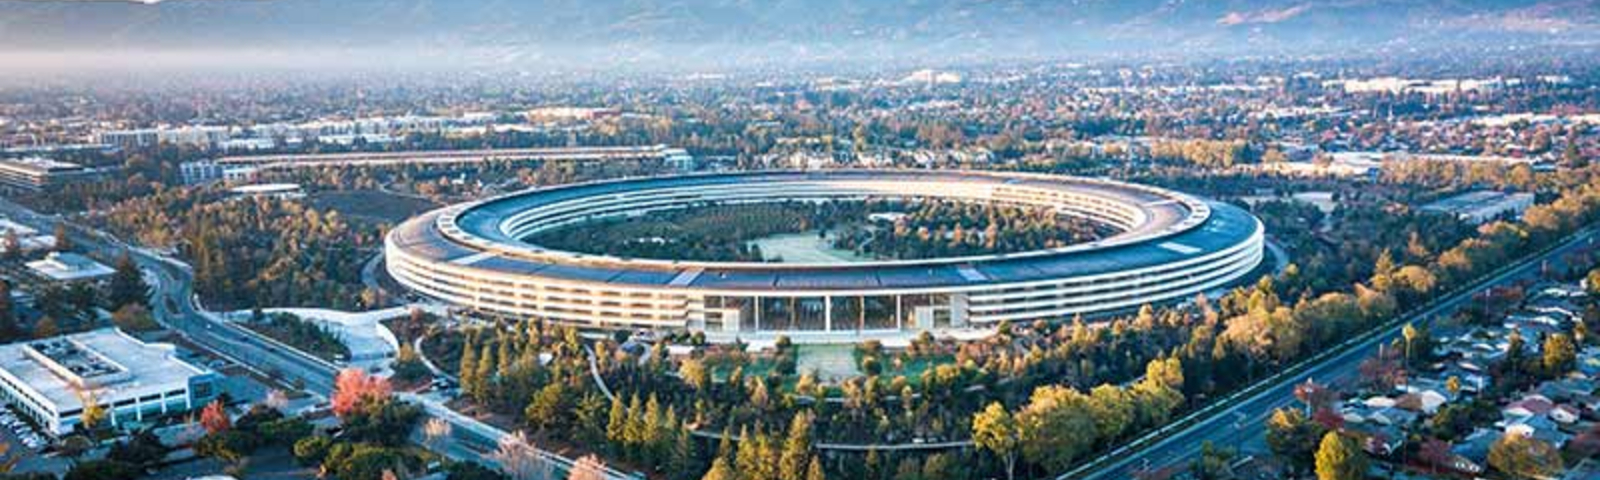 Reference - Apple Campus 2